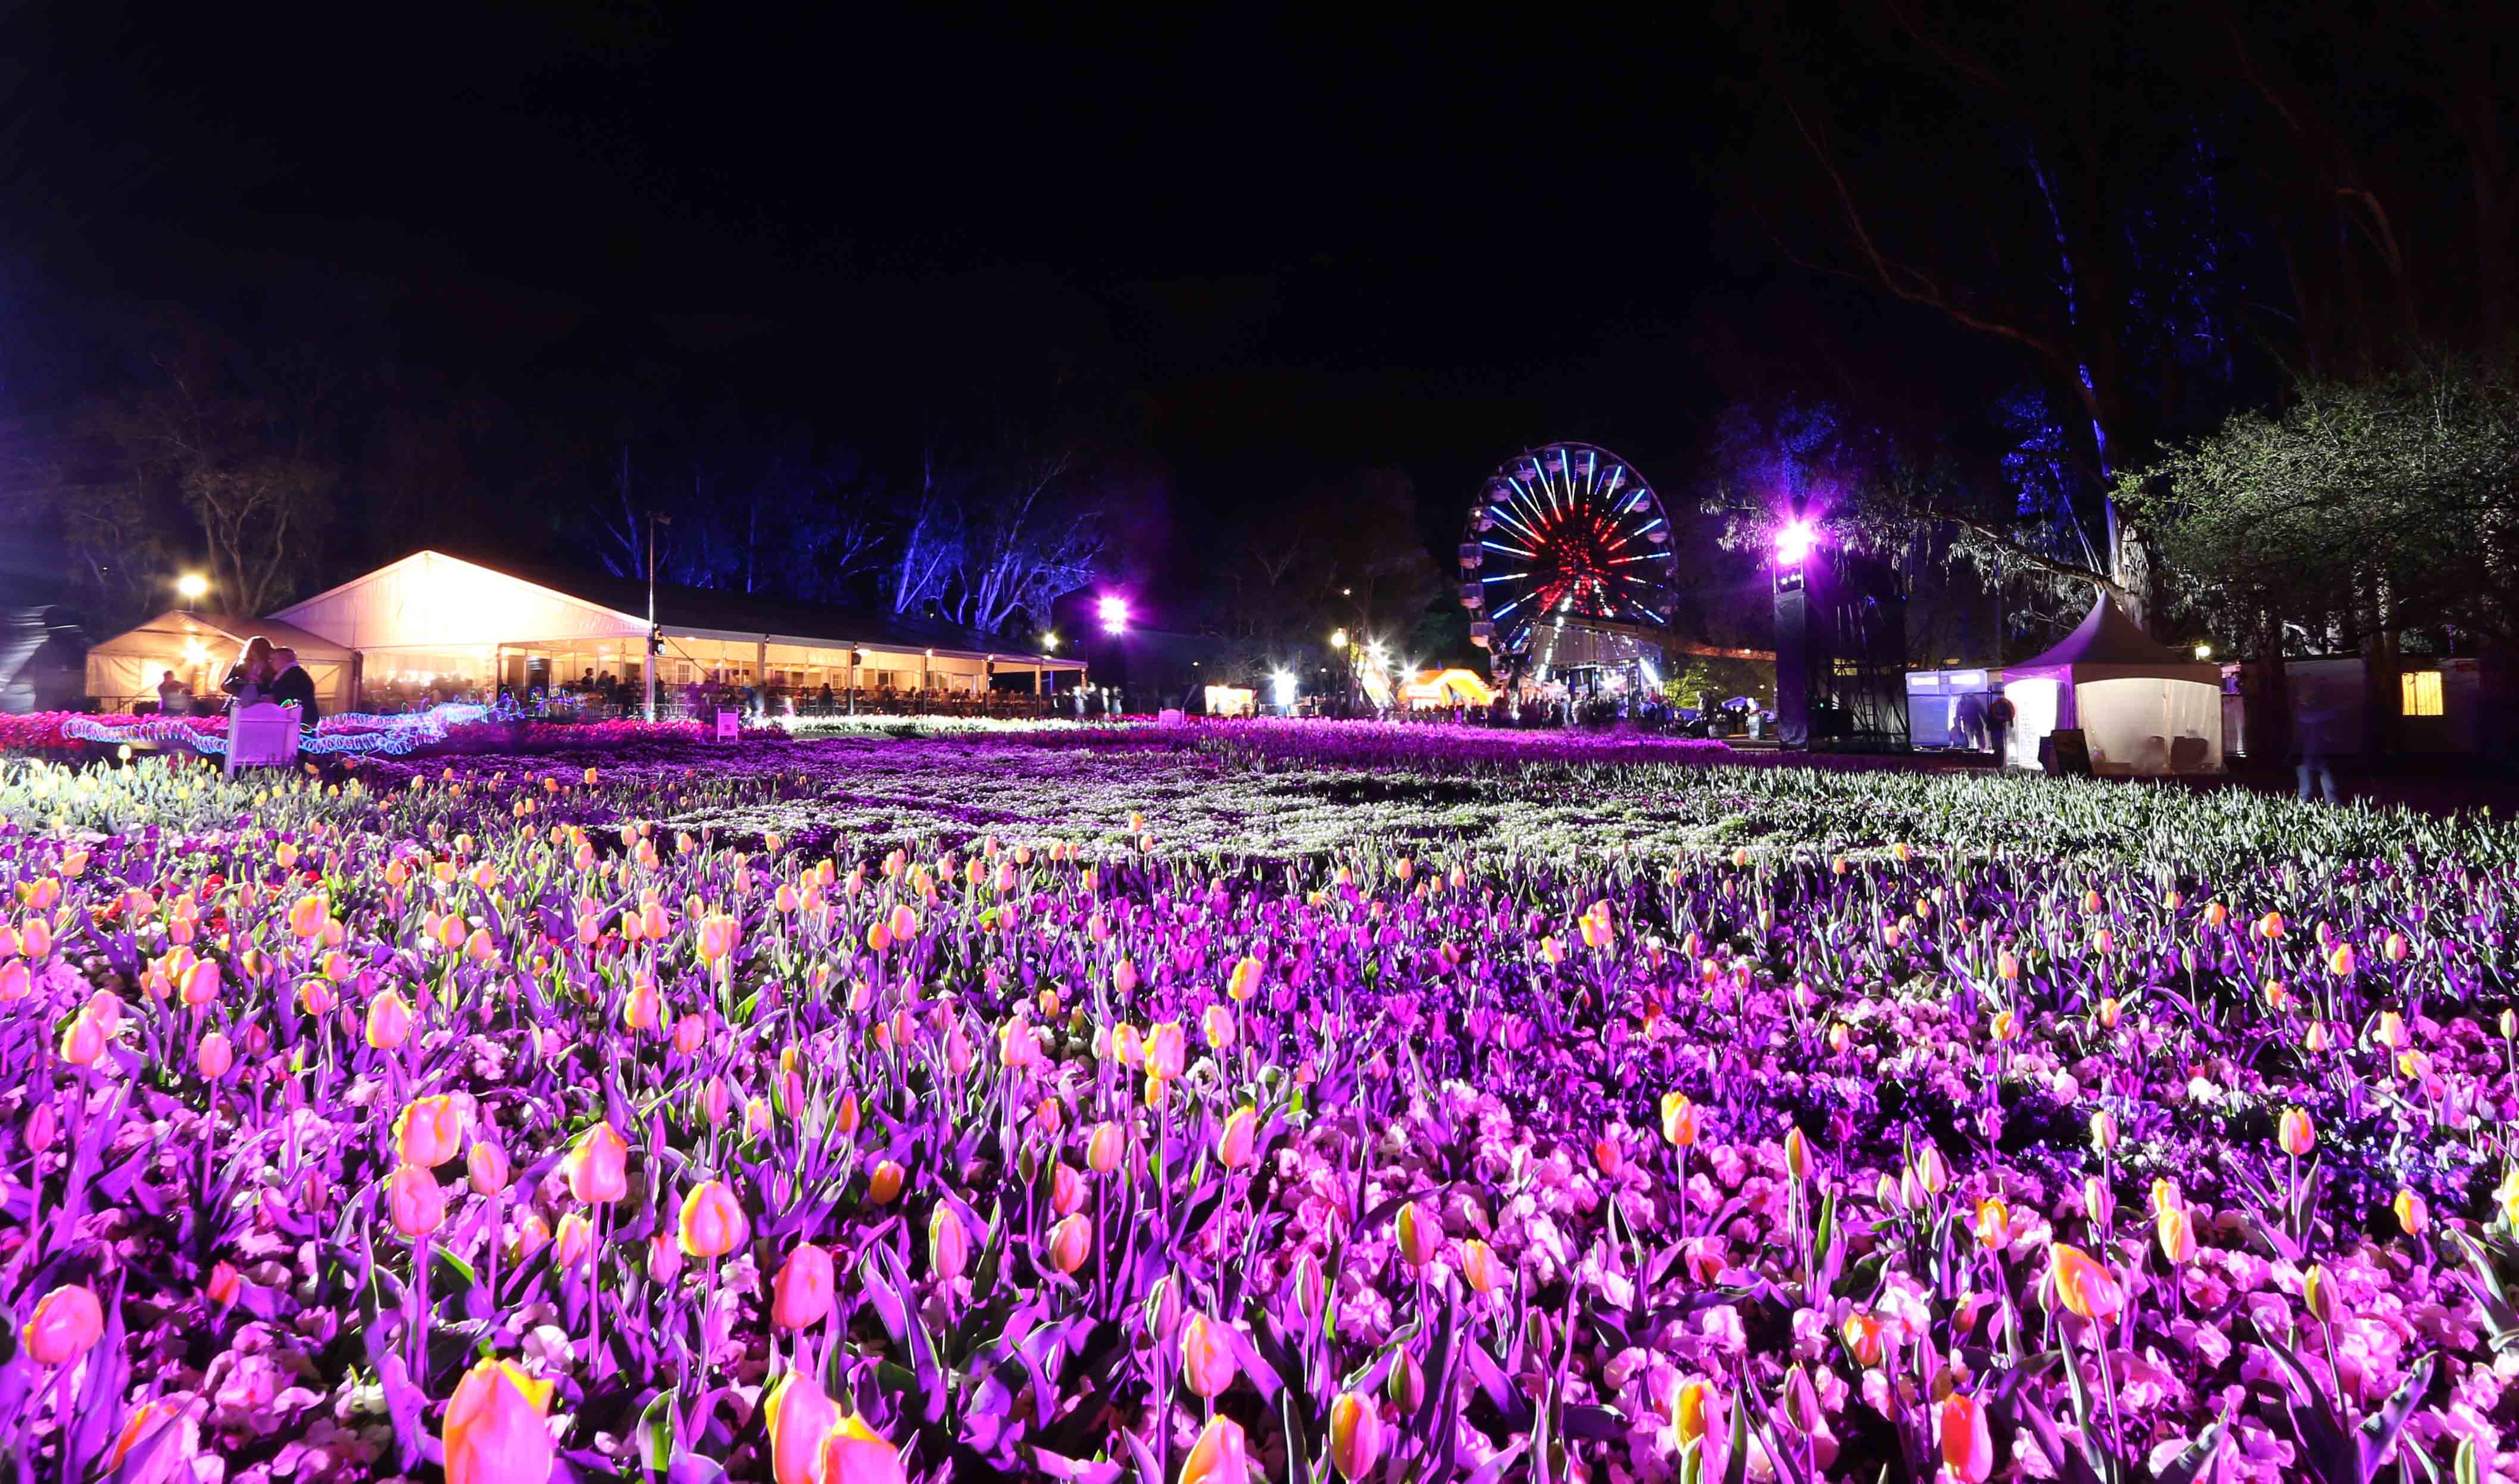 Tapestry of Flowers at Floriade NightFest in Canberra